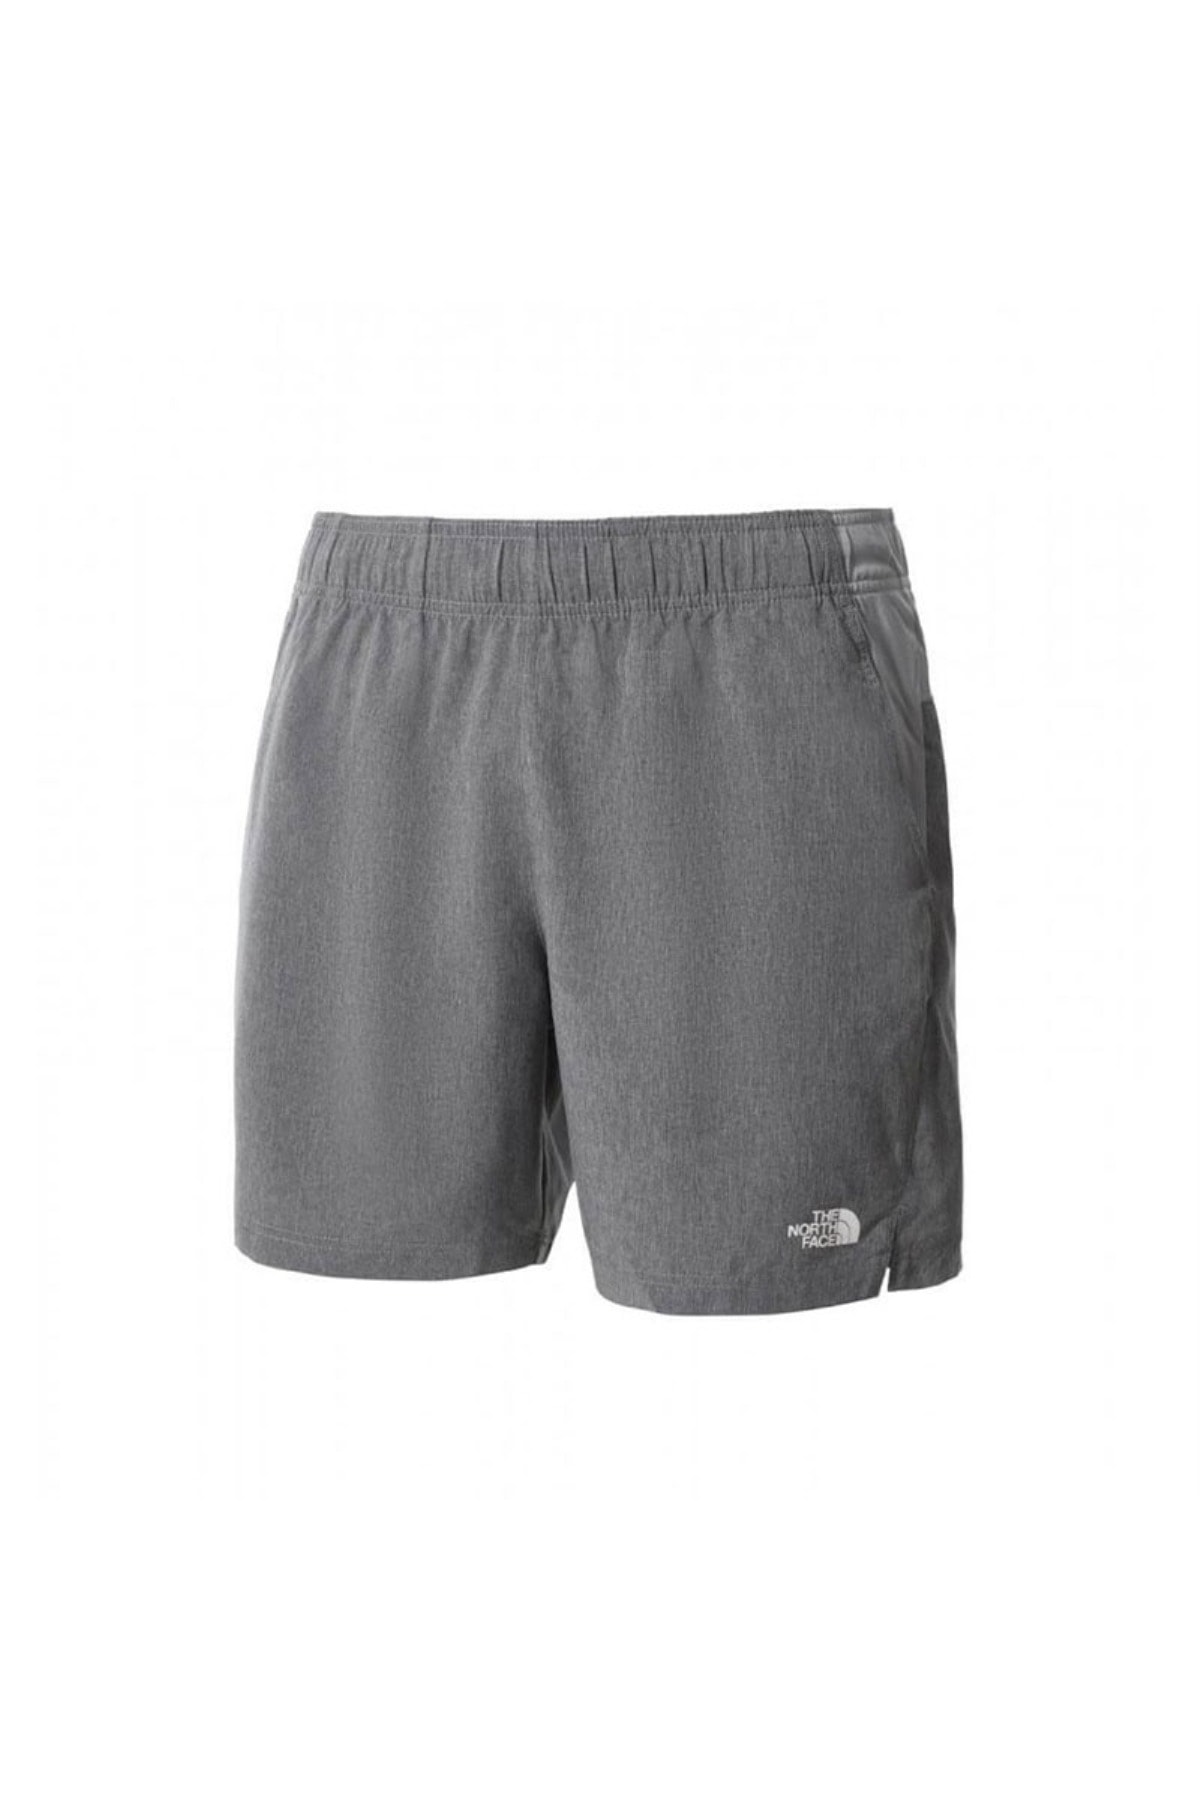 THE NORTH FACE M 24/7 Short